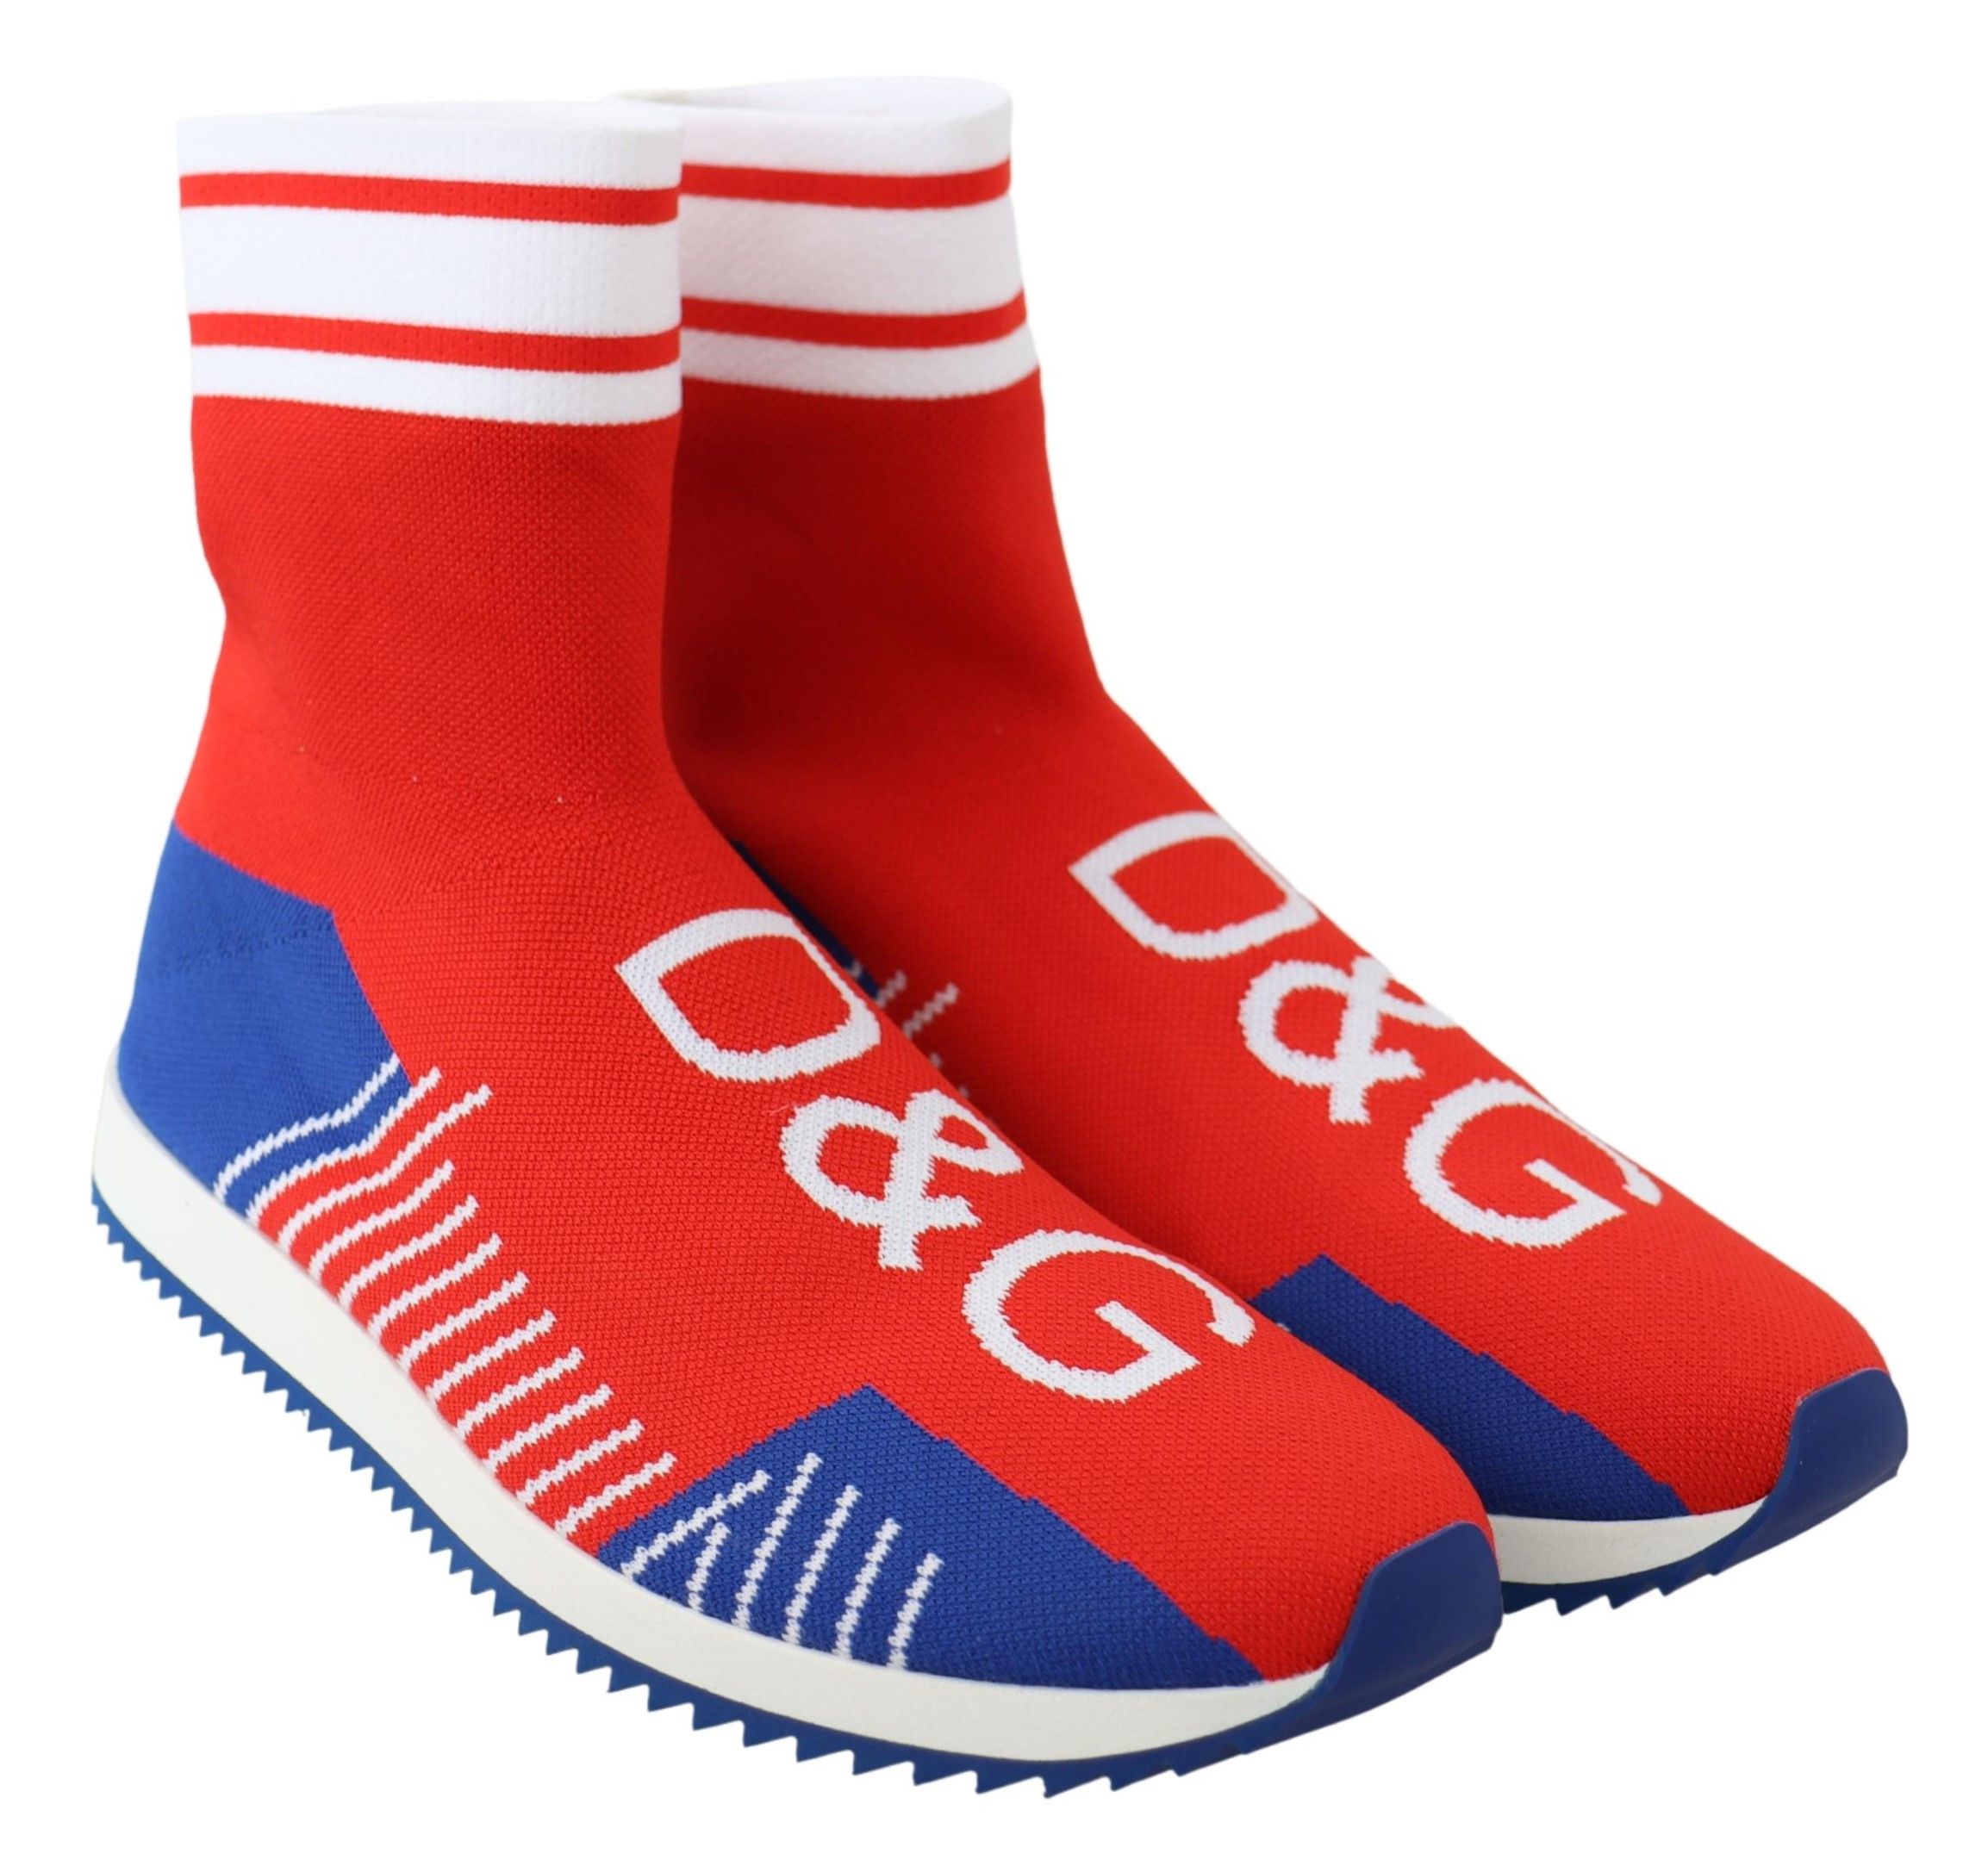 Dolce & Gabbana
Gorgeous brand new with tags, 100% AuthenticDolce & GabbanaMens shoes.
Model: SORRENTO, Casual socks sneakers
Color: Blue and red
Material:100% Polyester PL
Sole: Rubber
Logo details
Made in Italy
Very exclusive and high craftsmanship